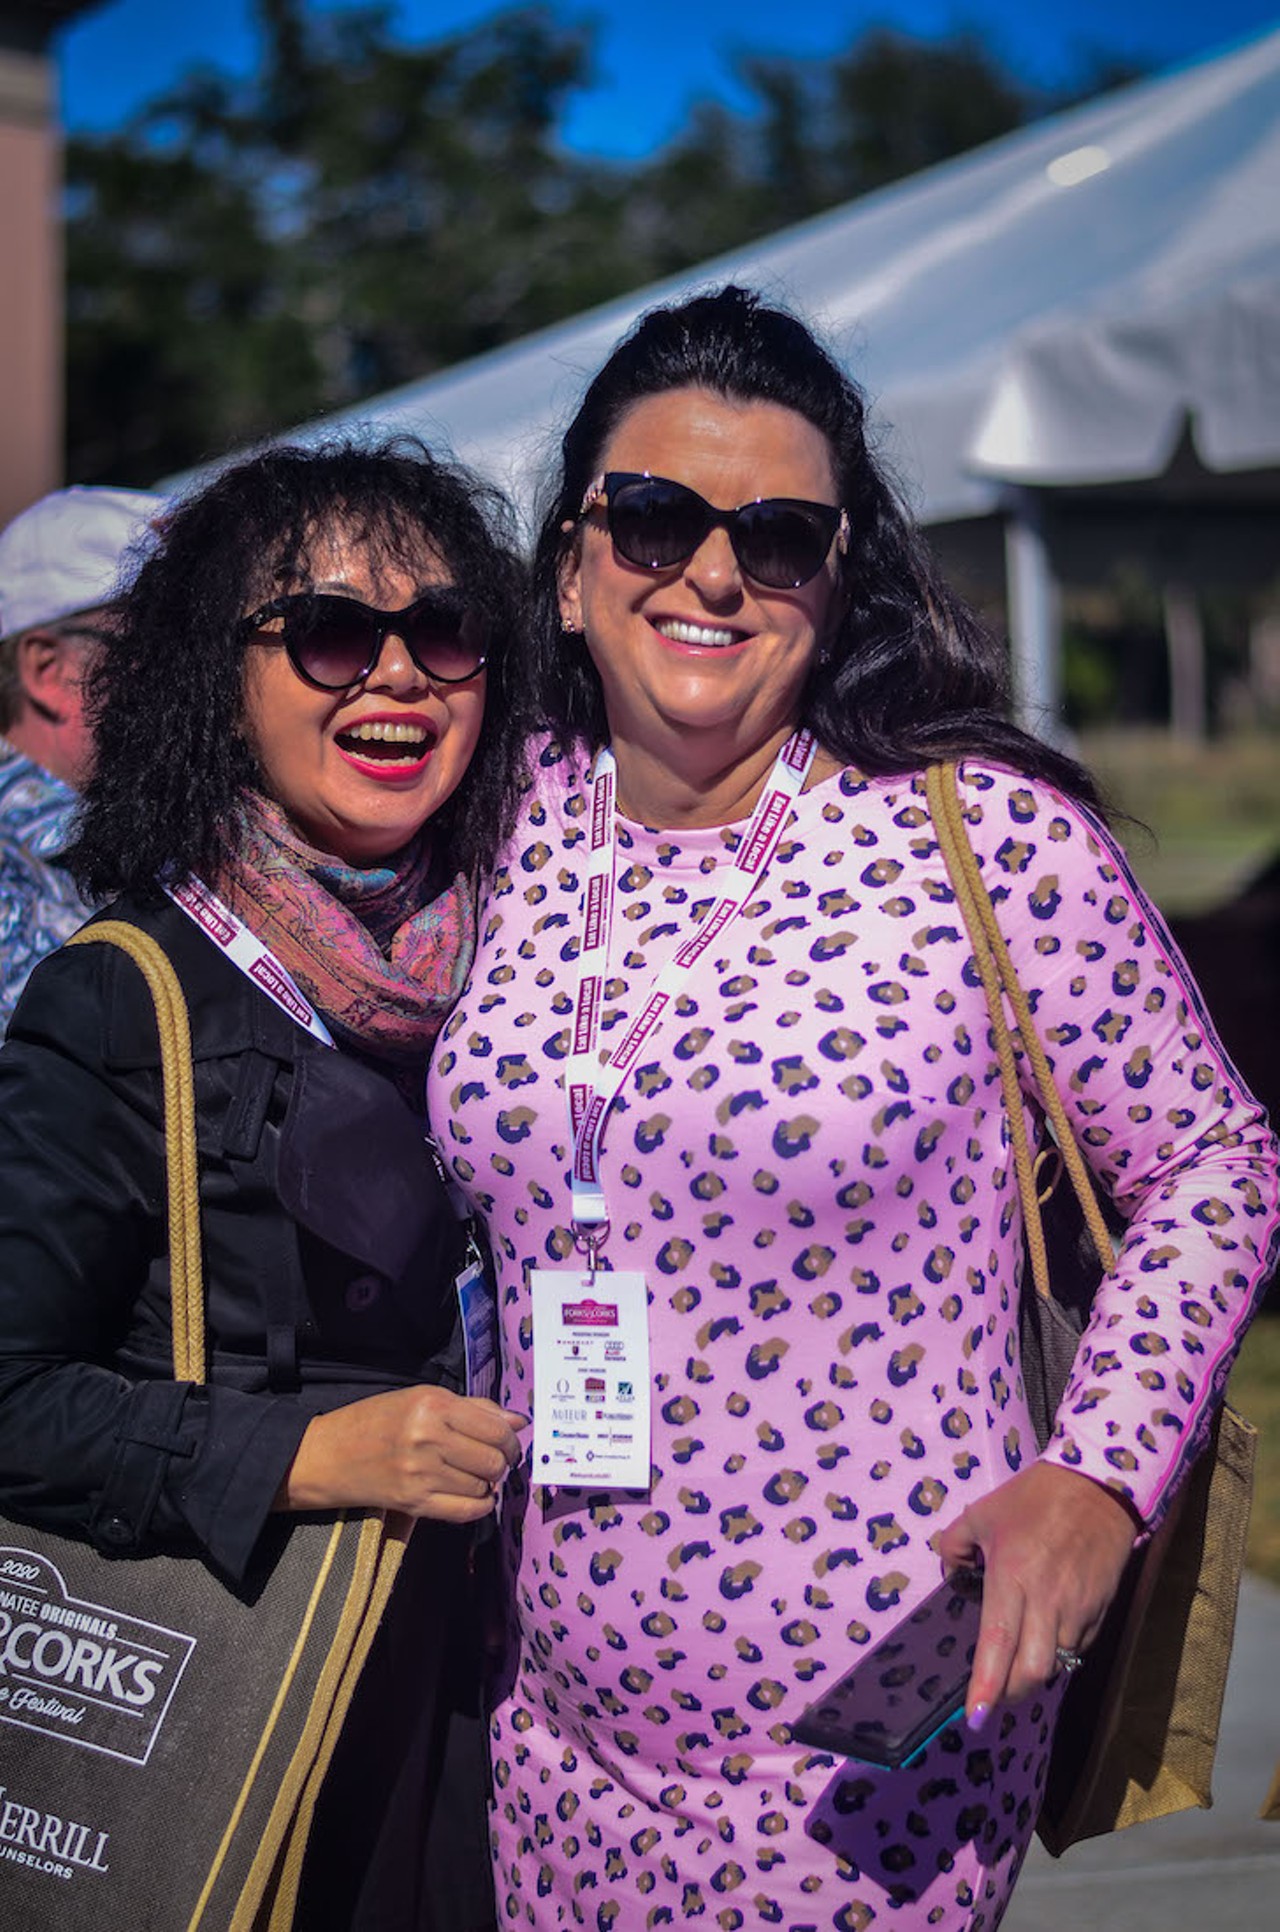 Everyone we saw at the 2020 Forks & Corks food festival in Sarasota